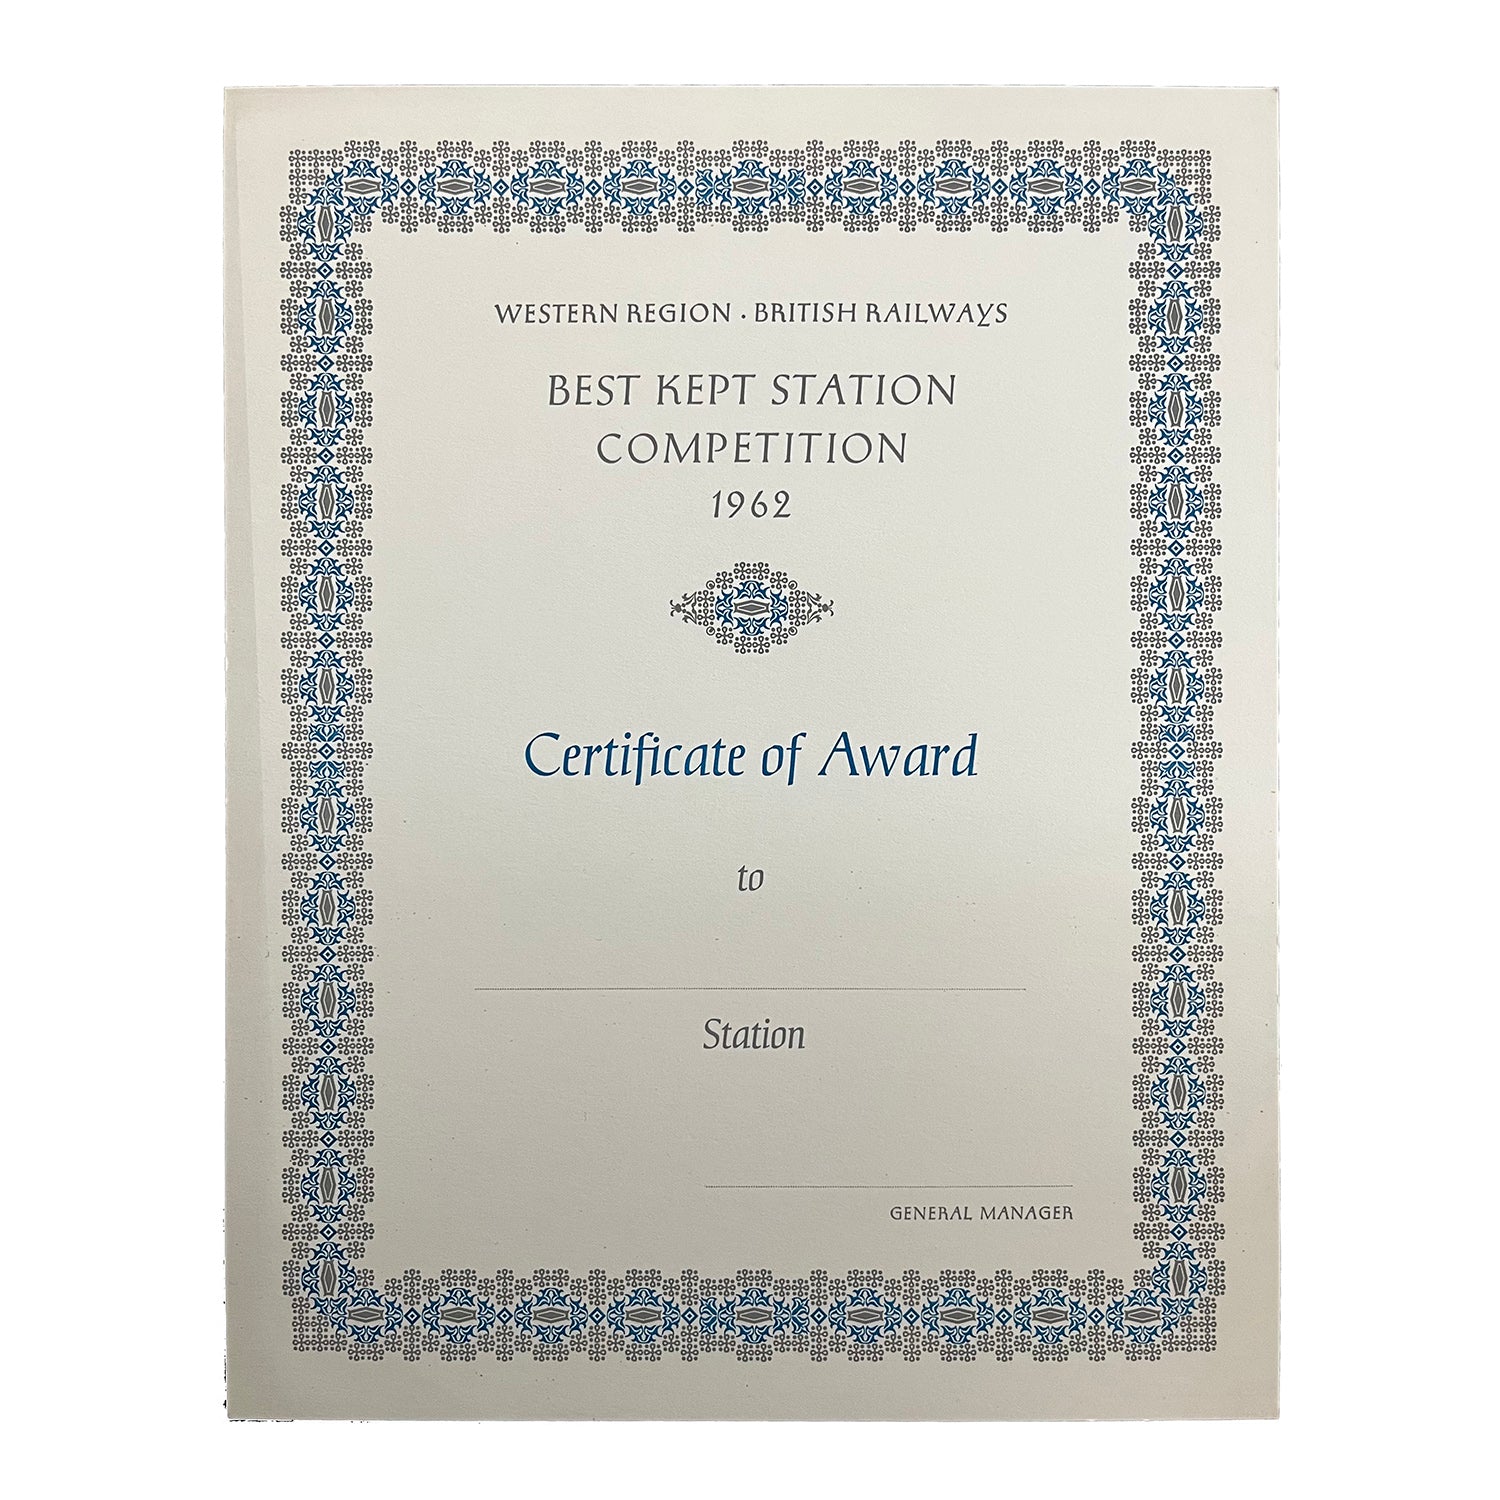 Best Kept Station certificate, published by British Railways (Western Region), printed by the Curwen Press, 1962.